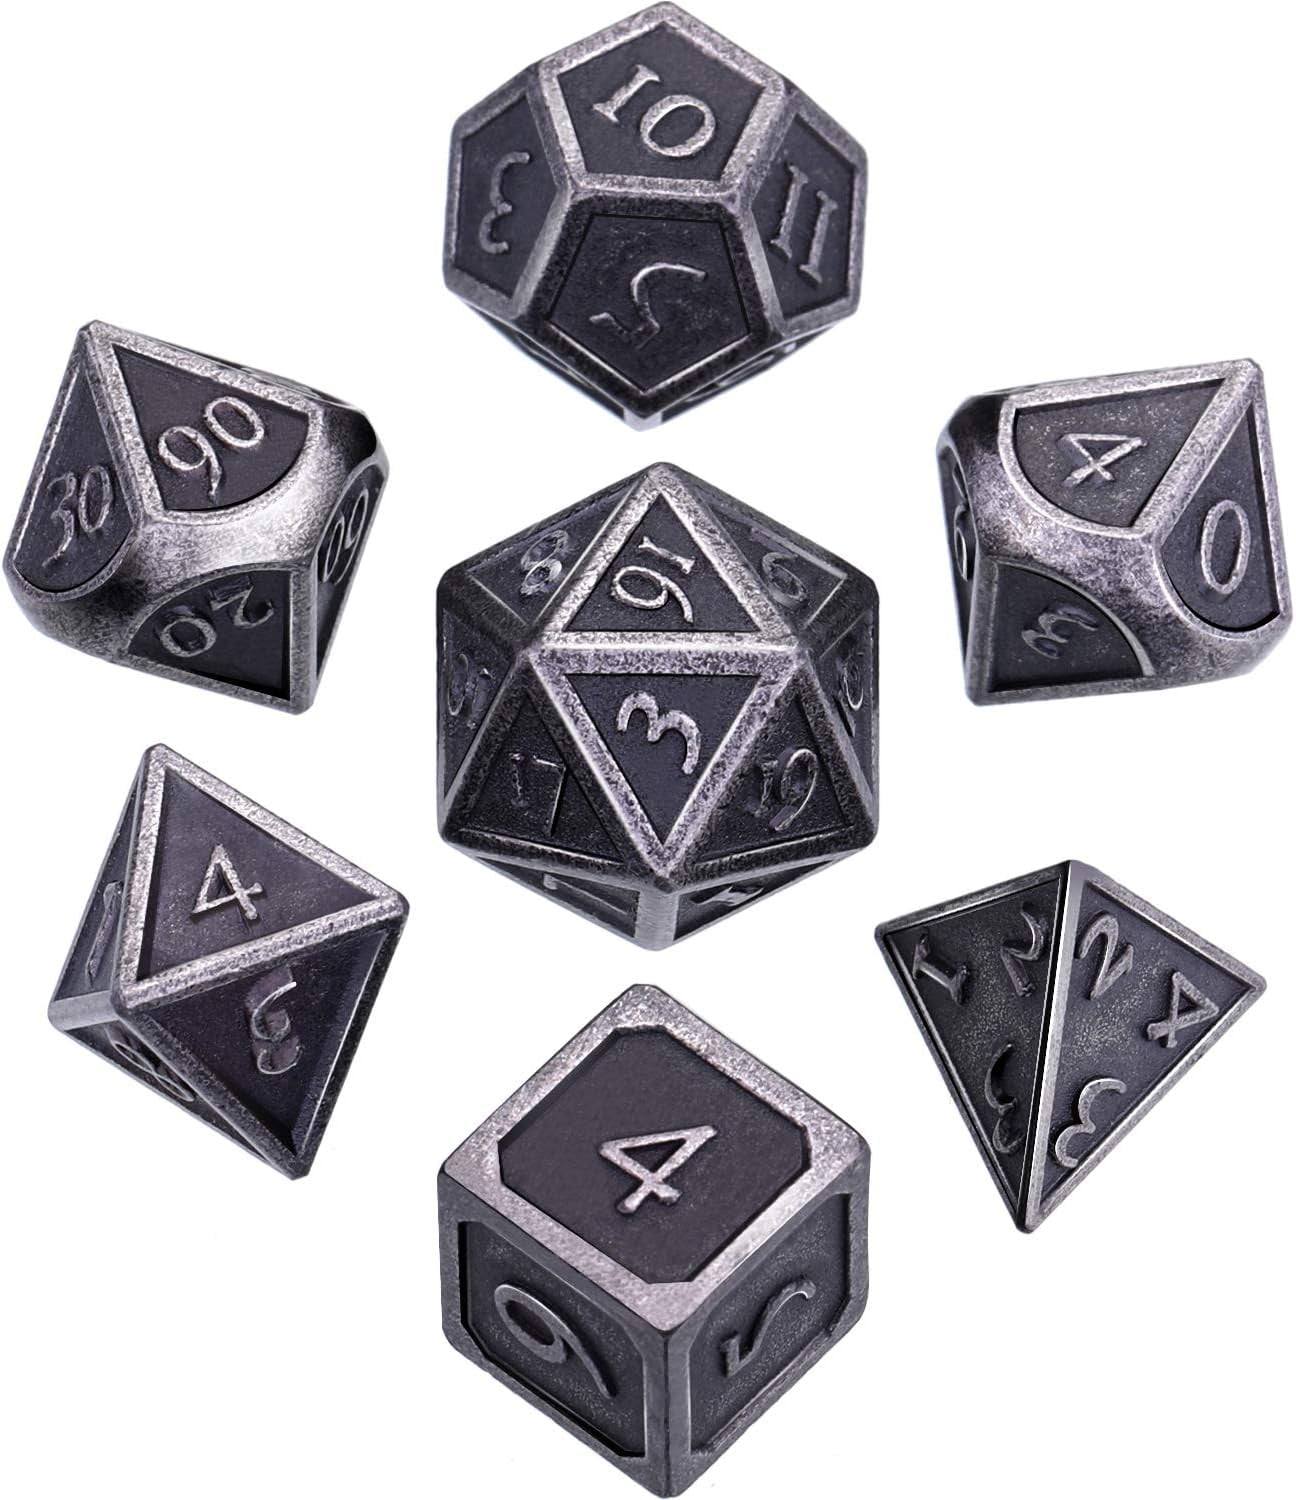 7 Pieces Metal Dices Set DND Game Polyhedral Solid Metal D&D Dice Set with Storage Bag and Zinc Alloy with Enamel for Role Playing Game Dung